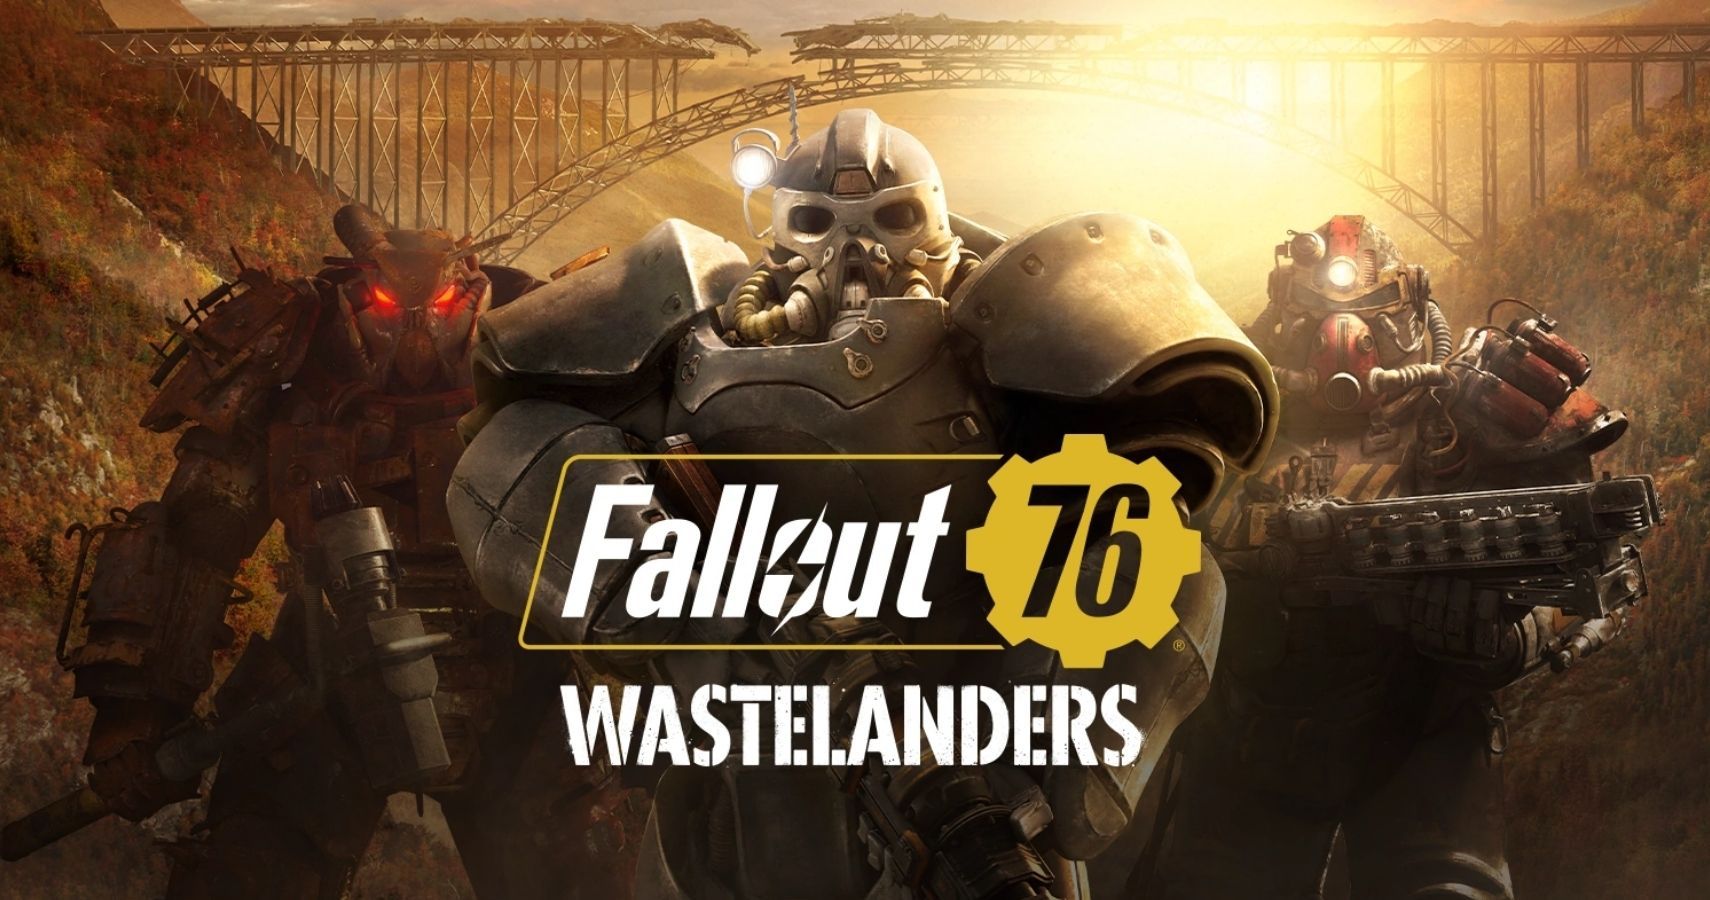 Three heavily armored soldiers stand in a post apocalyptic setting. The text reads: Fallout 76 Wastelanders.